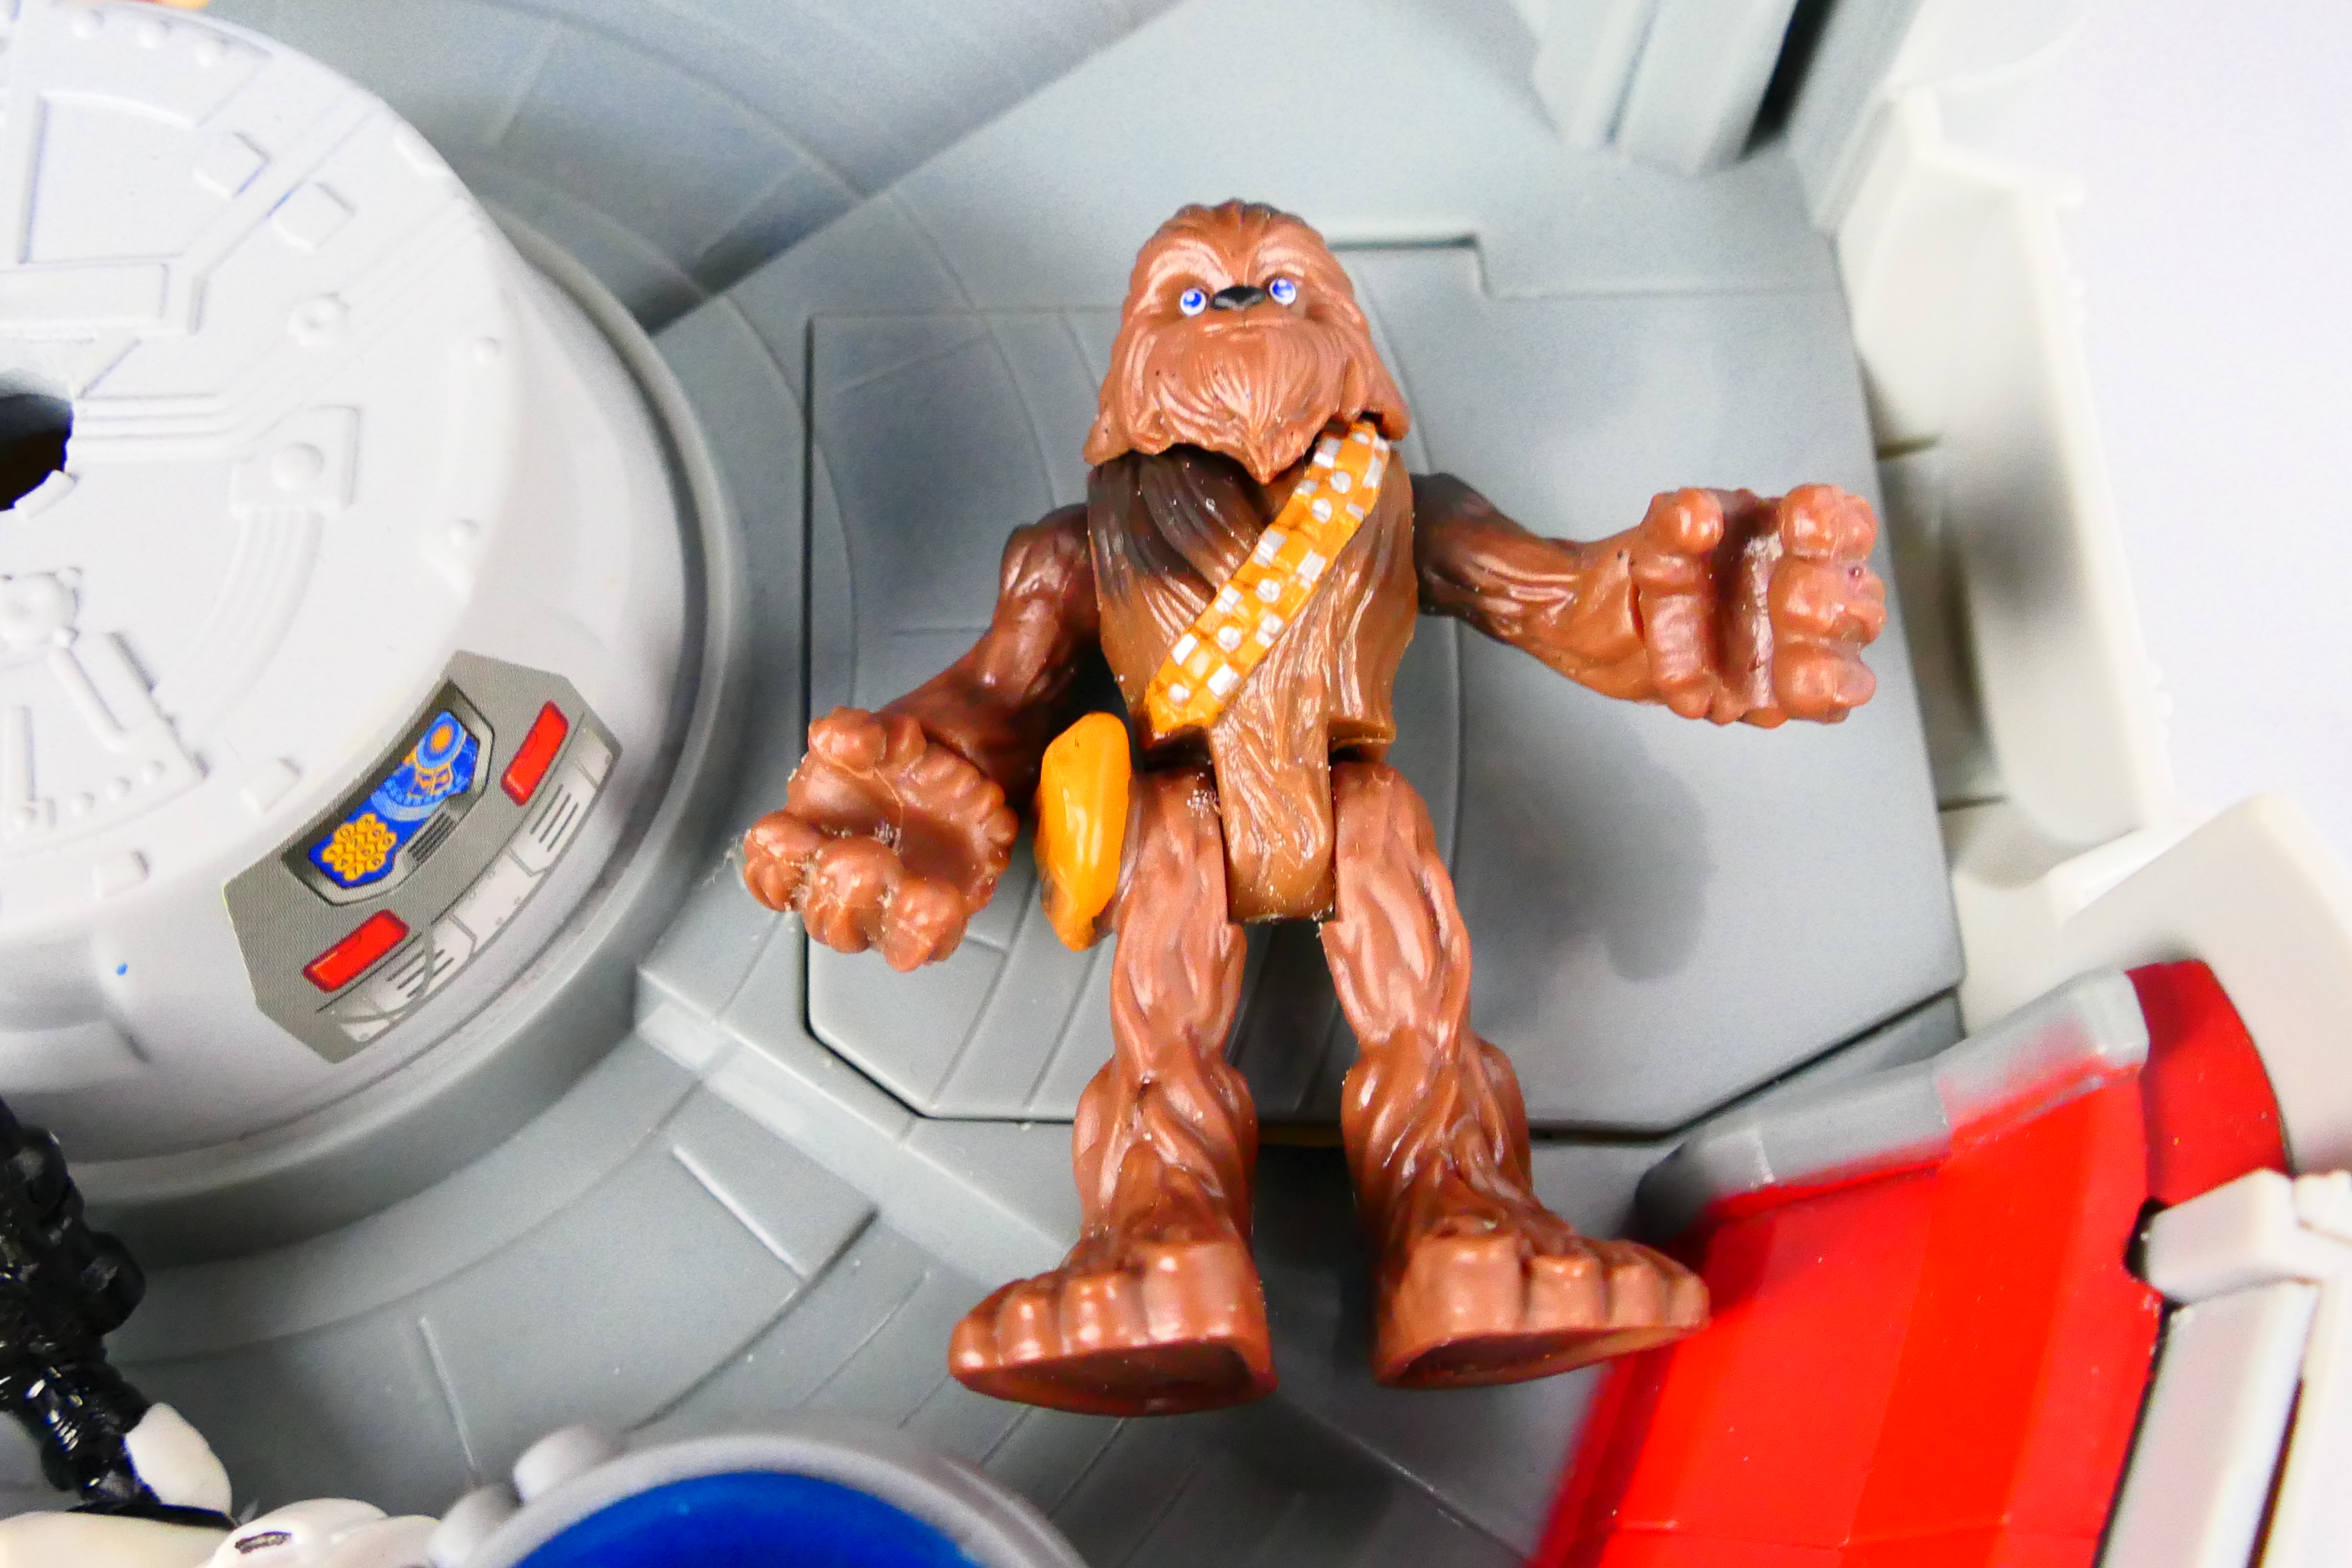 Hasbro - Star Wars - A Star Wars Millennium Falcon Plat Set with figures including Hans, - Image 9 of 13